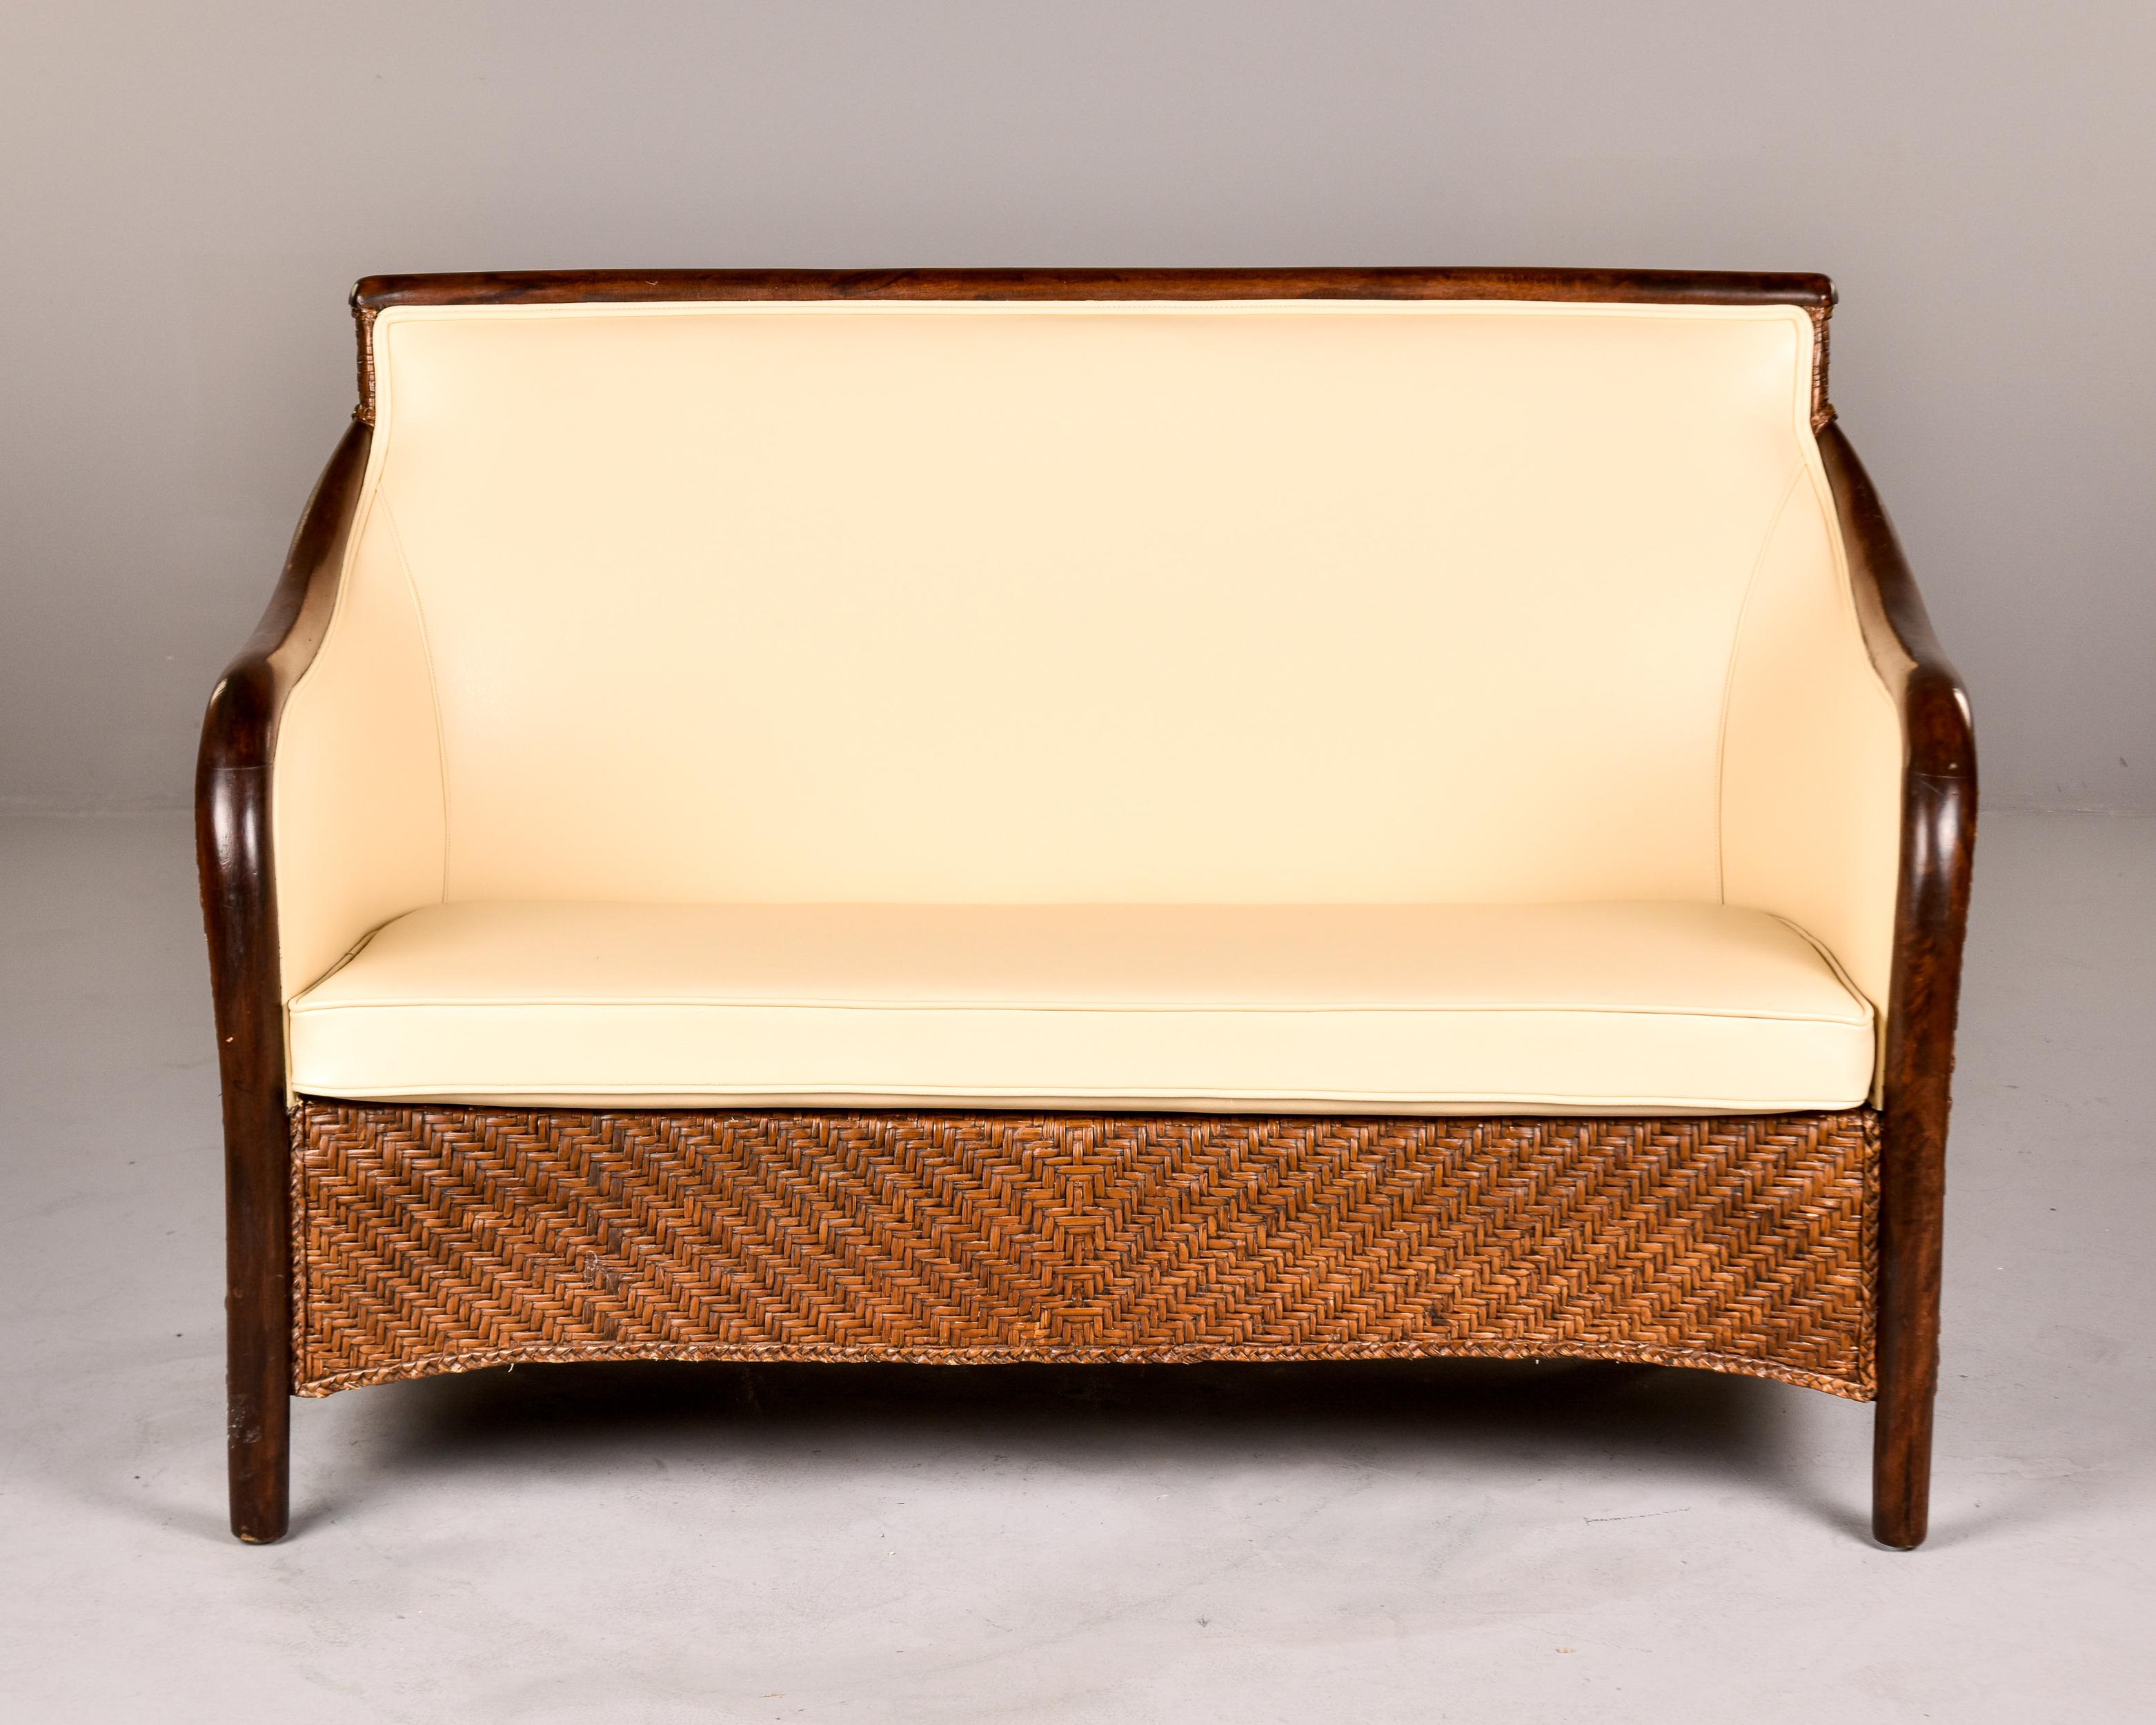 Italian Art Deco Wicker Framed Settee with New Leather Upholstery For Sale